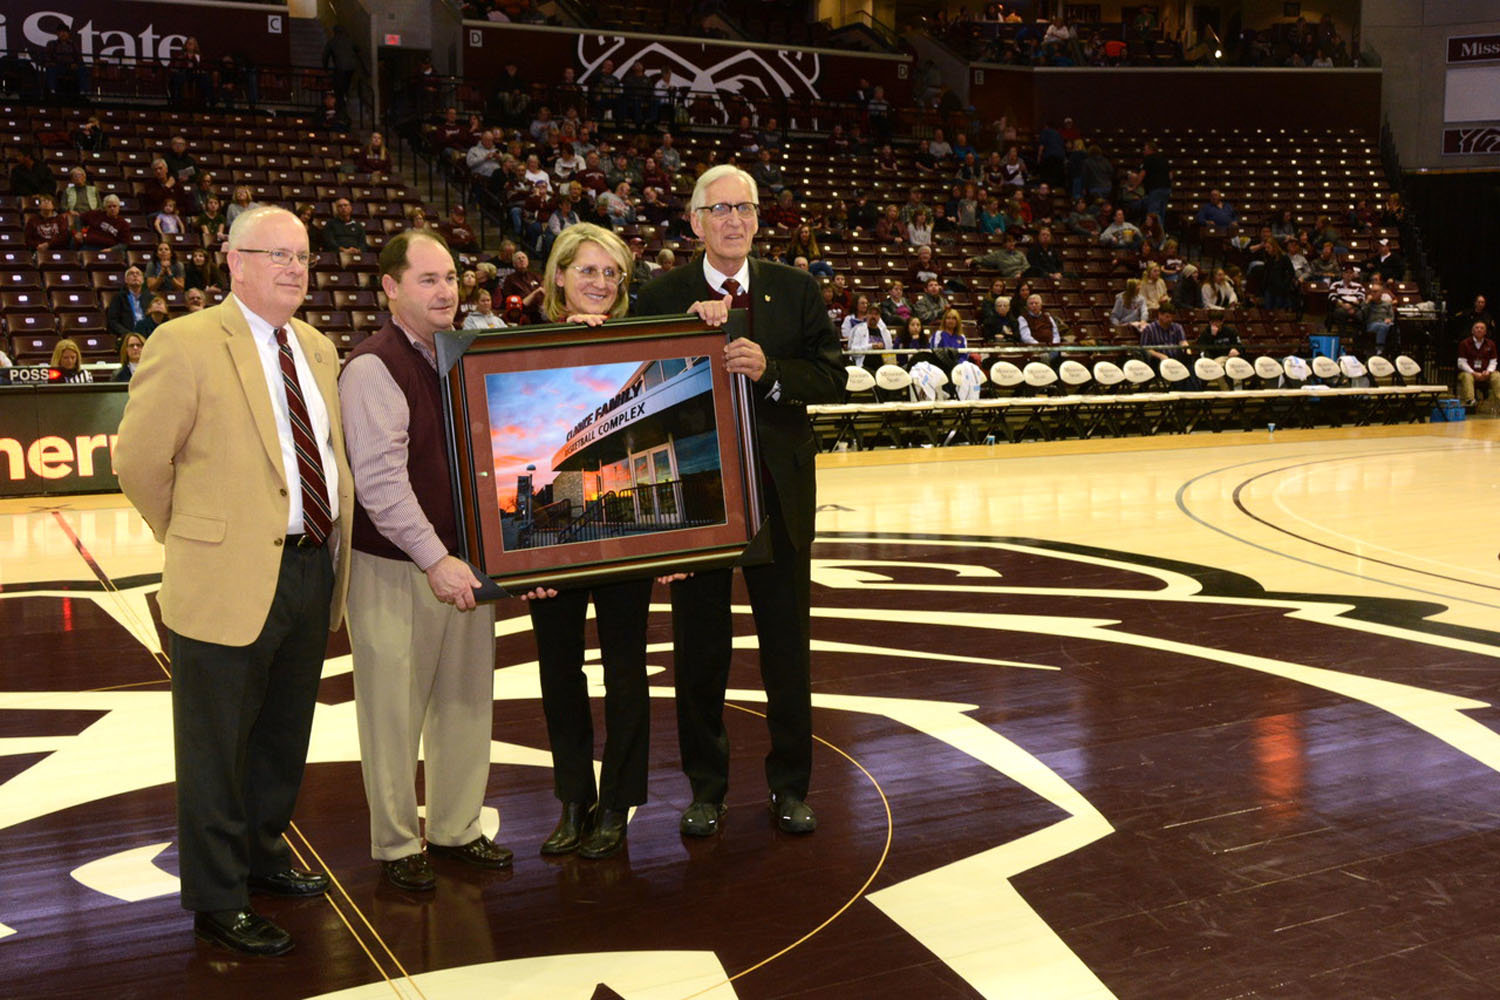 CLARKES’ COMPLEX
Missouri State University President Clif Smart, from left, and Athletics Director Kyle Moats on Jan. 12 present Krystyna and Dr. Michael Clarke with a plaque recognizing their naming rights gift. The men’s and women’s basketball locker rooms and team facilities at the campus arena are now called the Clarke Family Basketball Complex. The university has not announced a new name for the arena since the JQH signage was removed seven months ago.